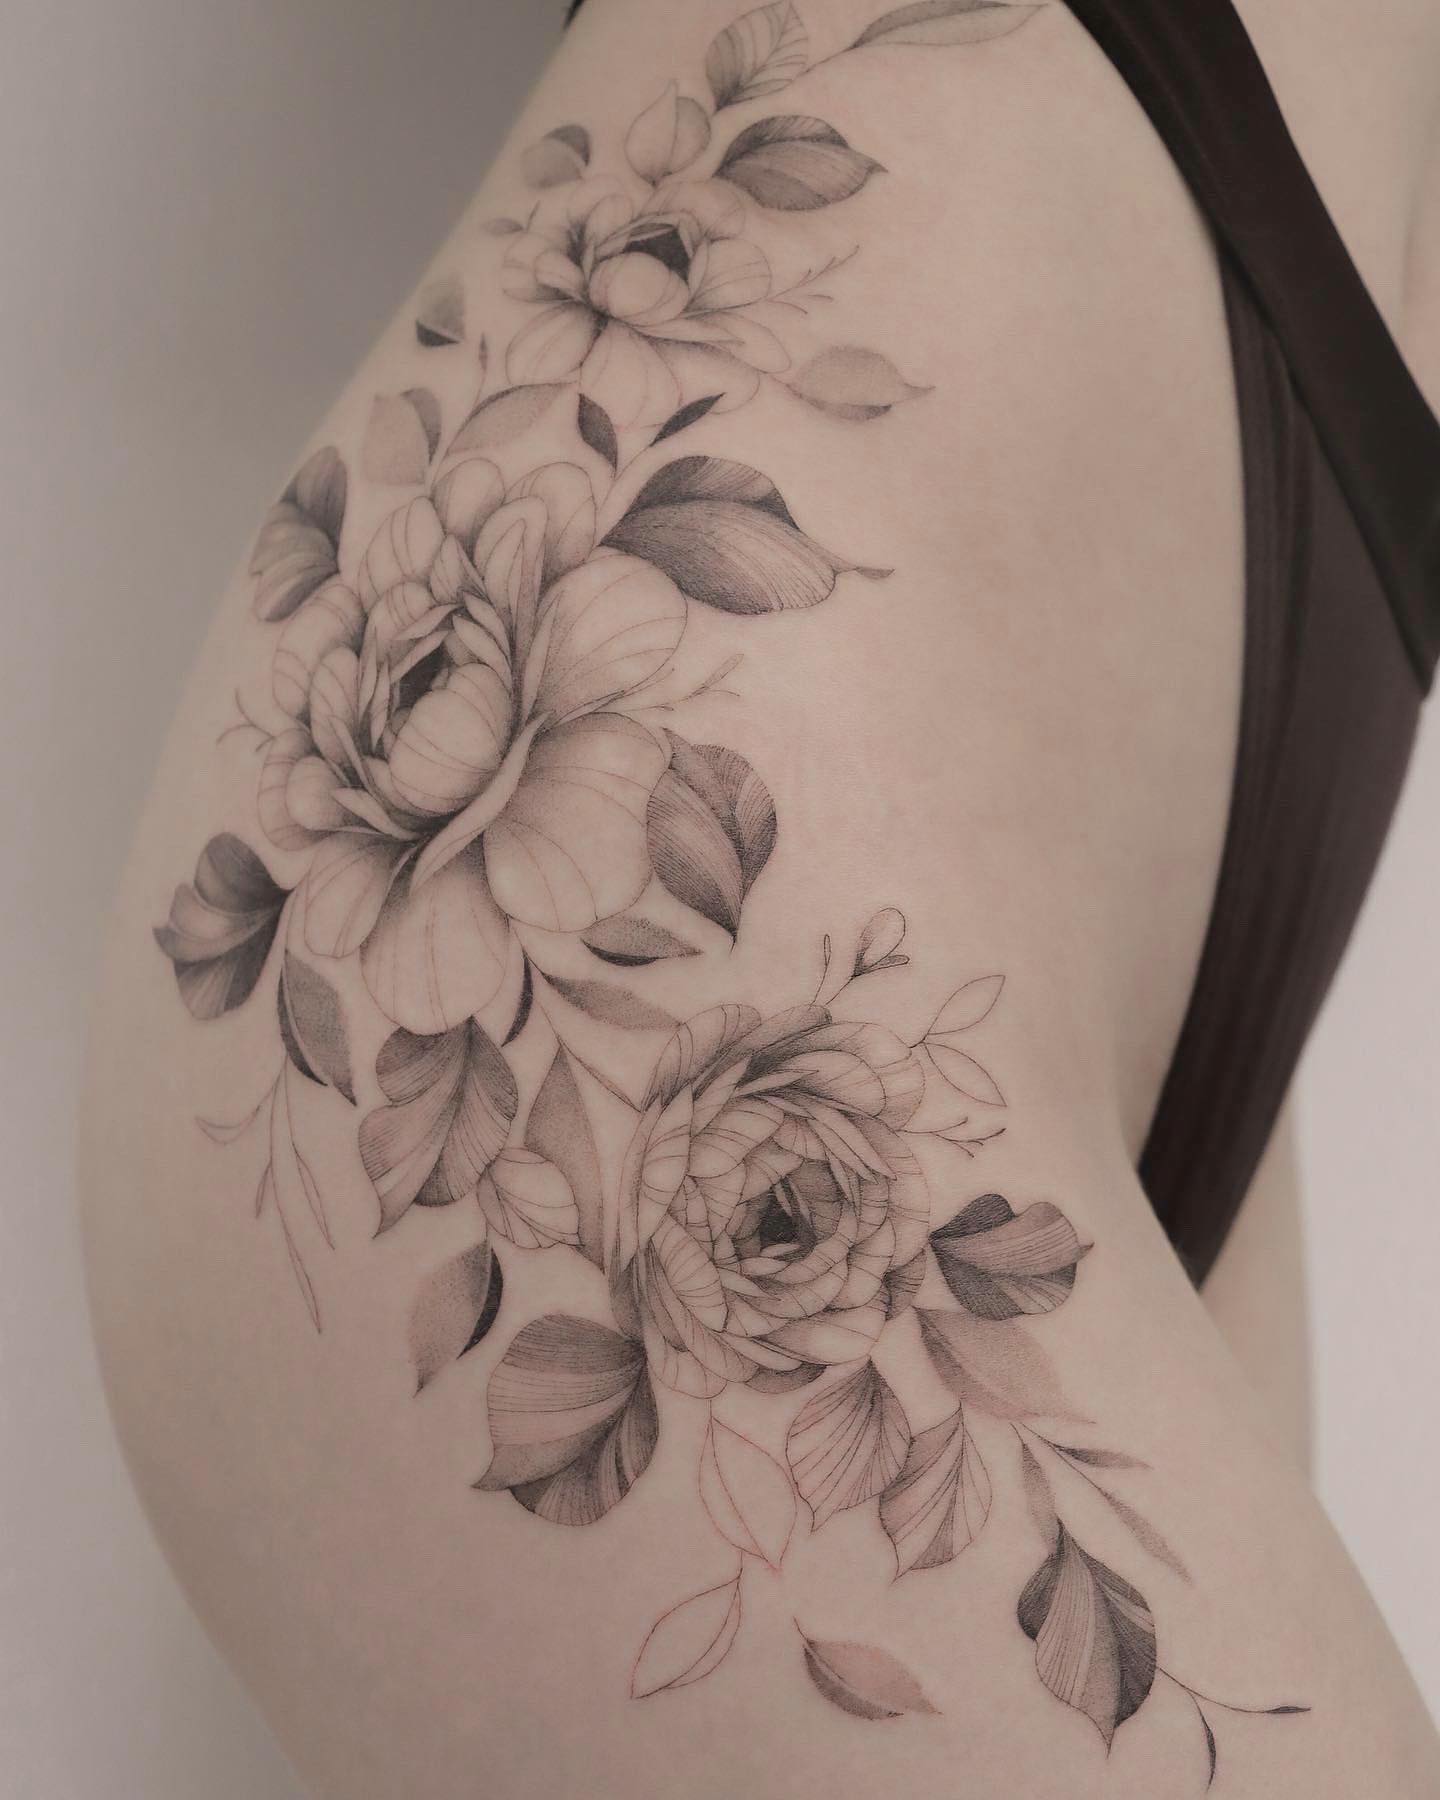 If you’re sensual and feminine and you truly love flowers, give it a go with this tattoo. It shows your inner peace, and love for nature and nurture + it is a gorgeous black and white hip tattoo to go for.